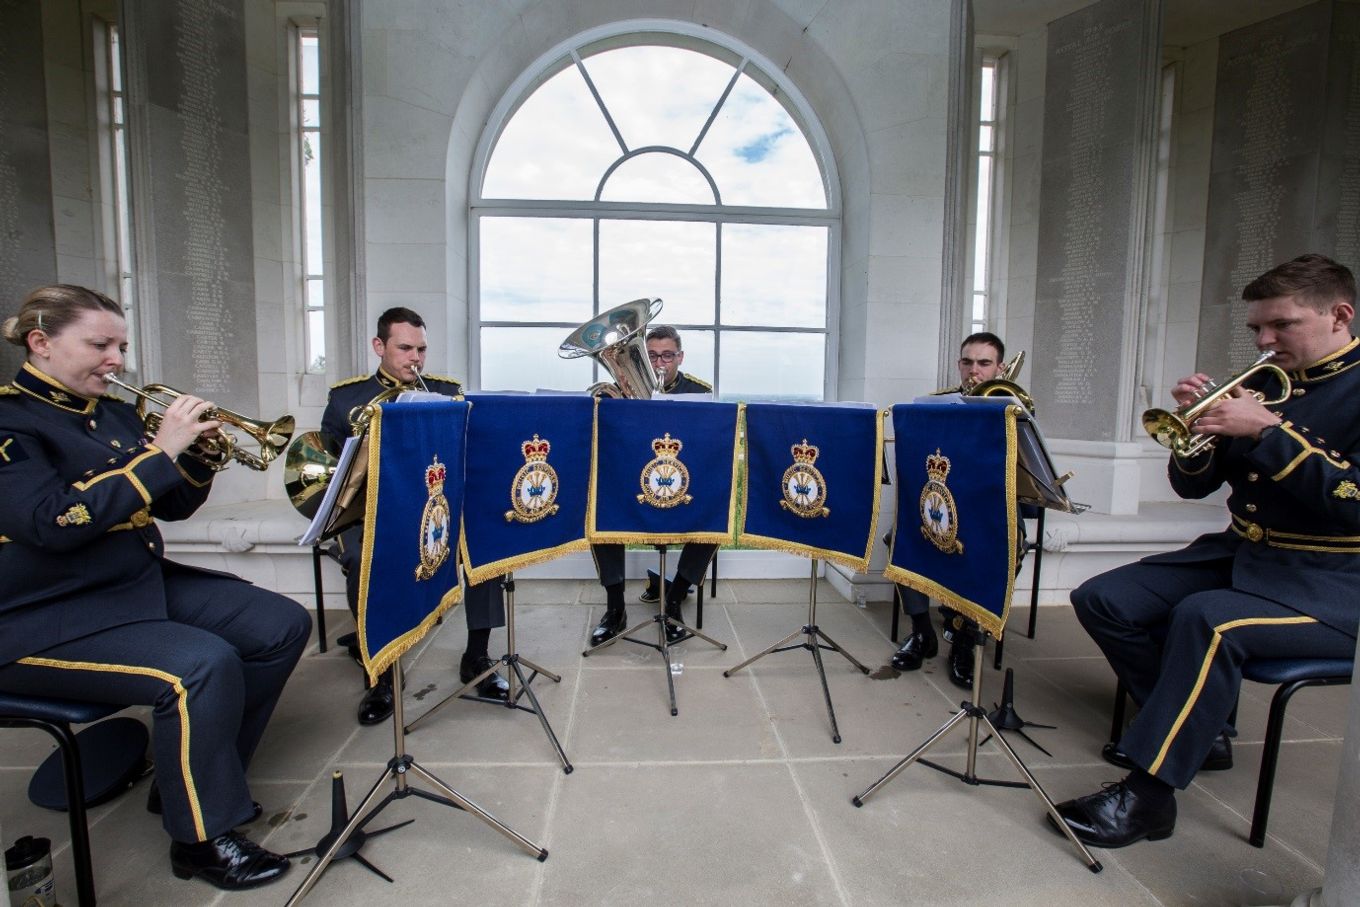 Brass Quintet play music infront of a lage arched window.